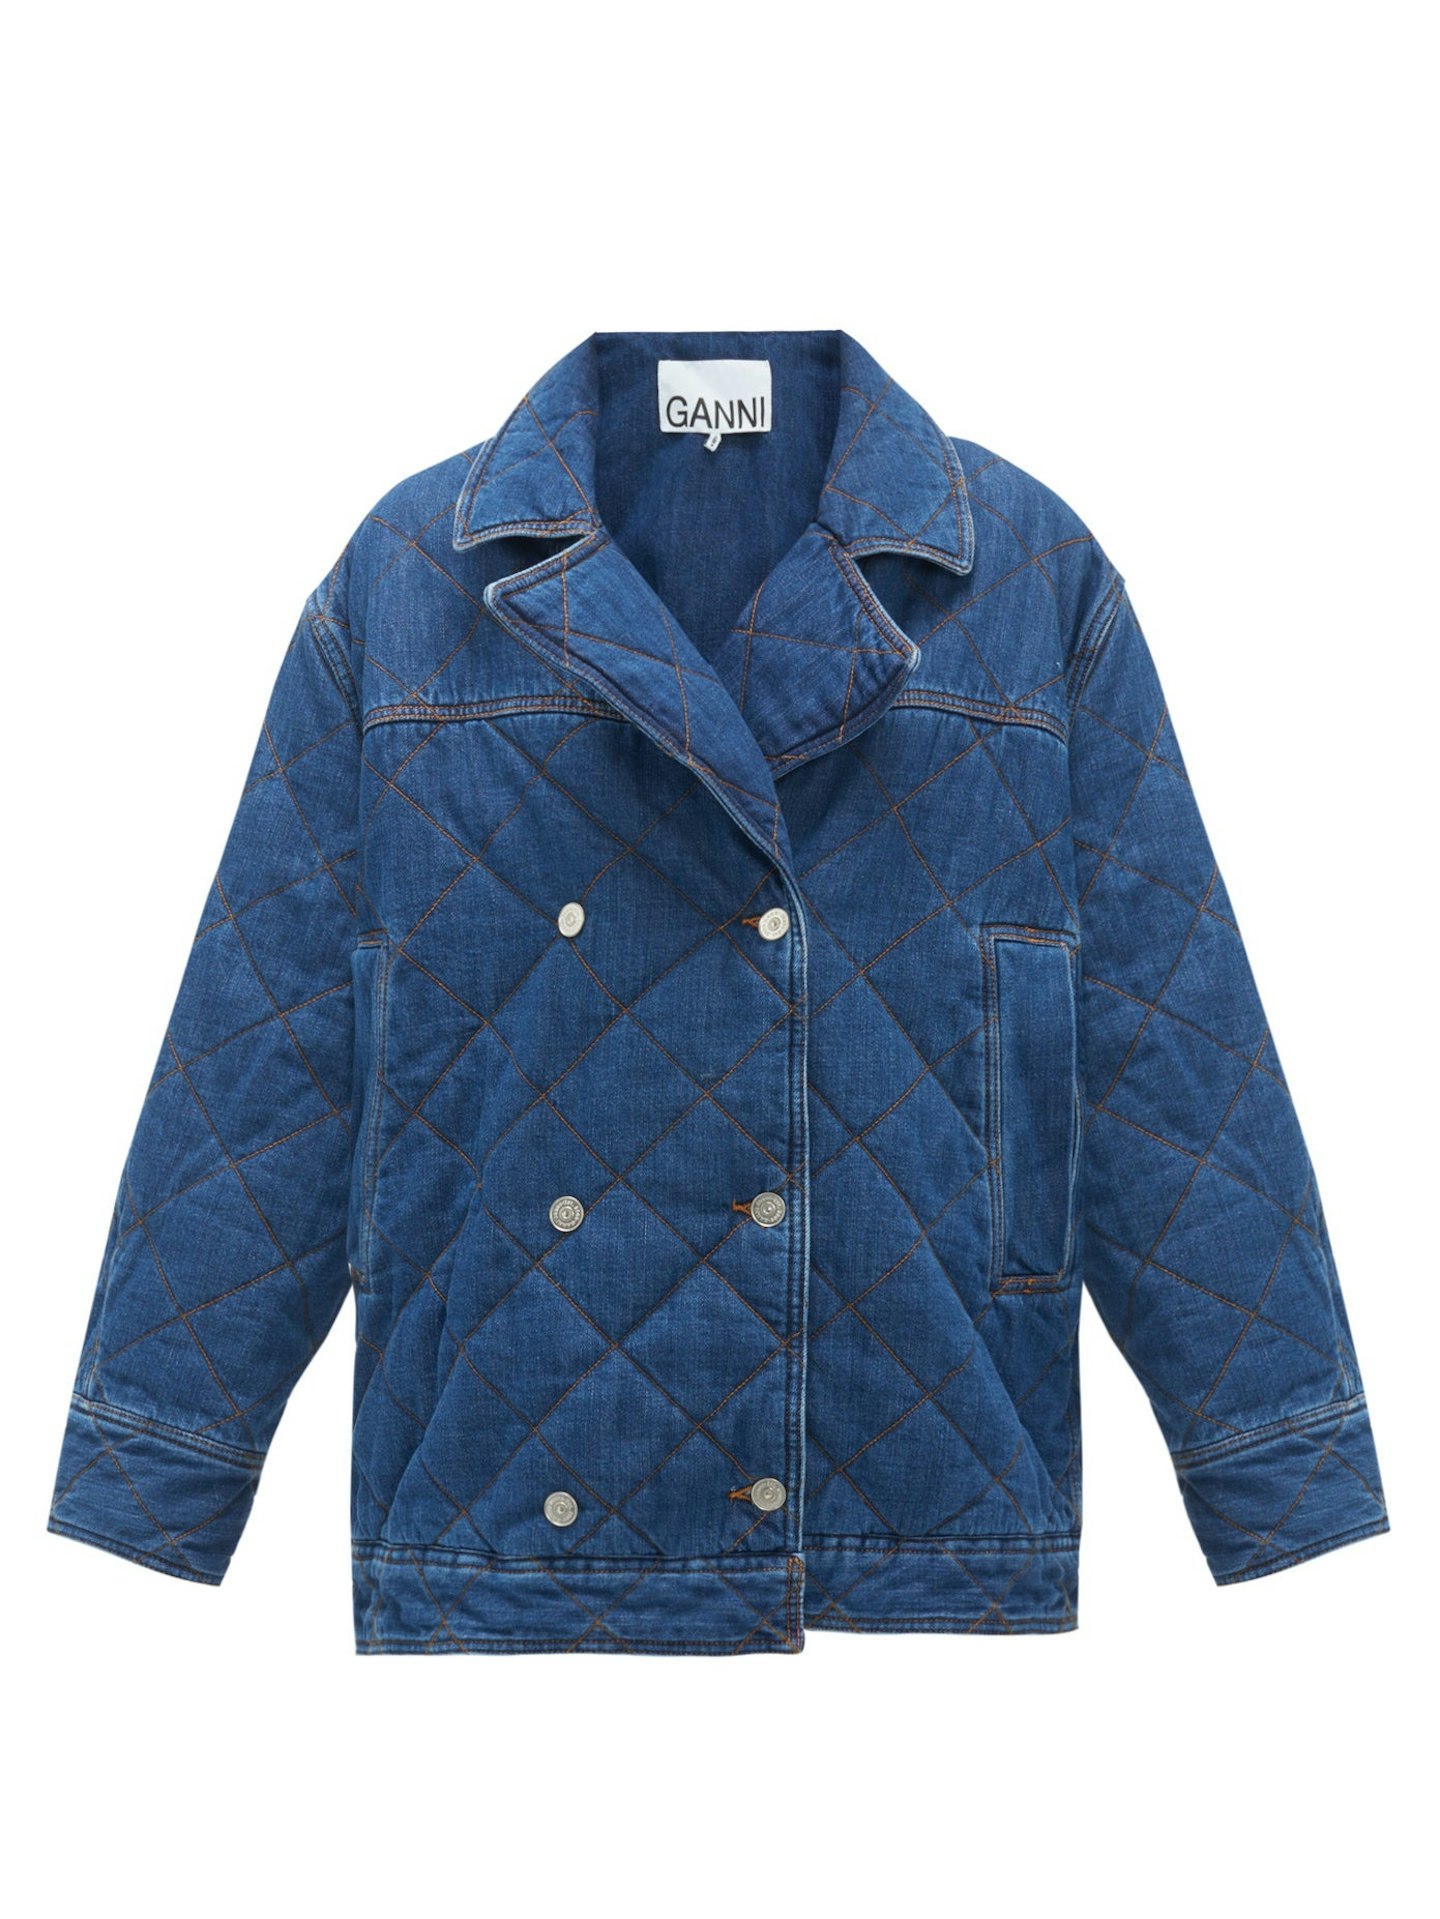 Ganni, Quilted Double-breasted Denim Jacket, WAS £375, NOW £187